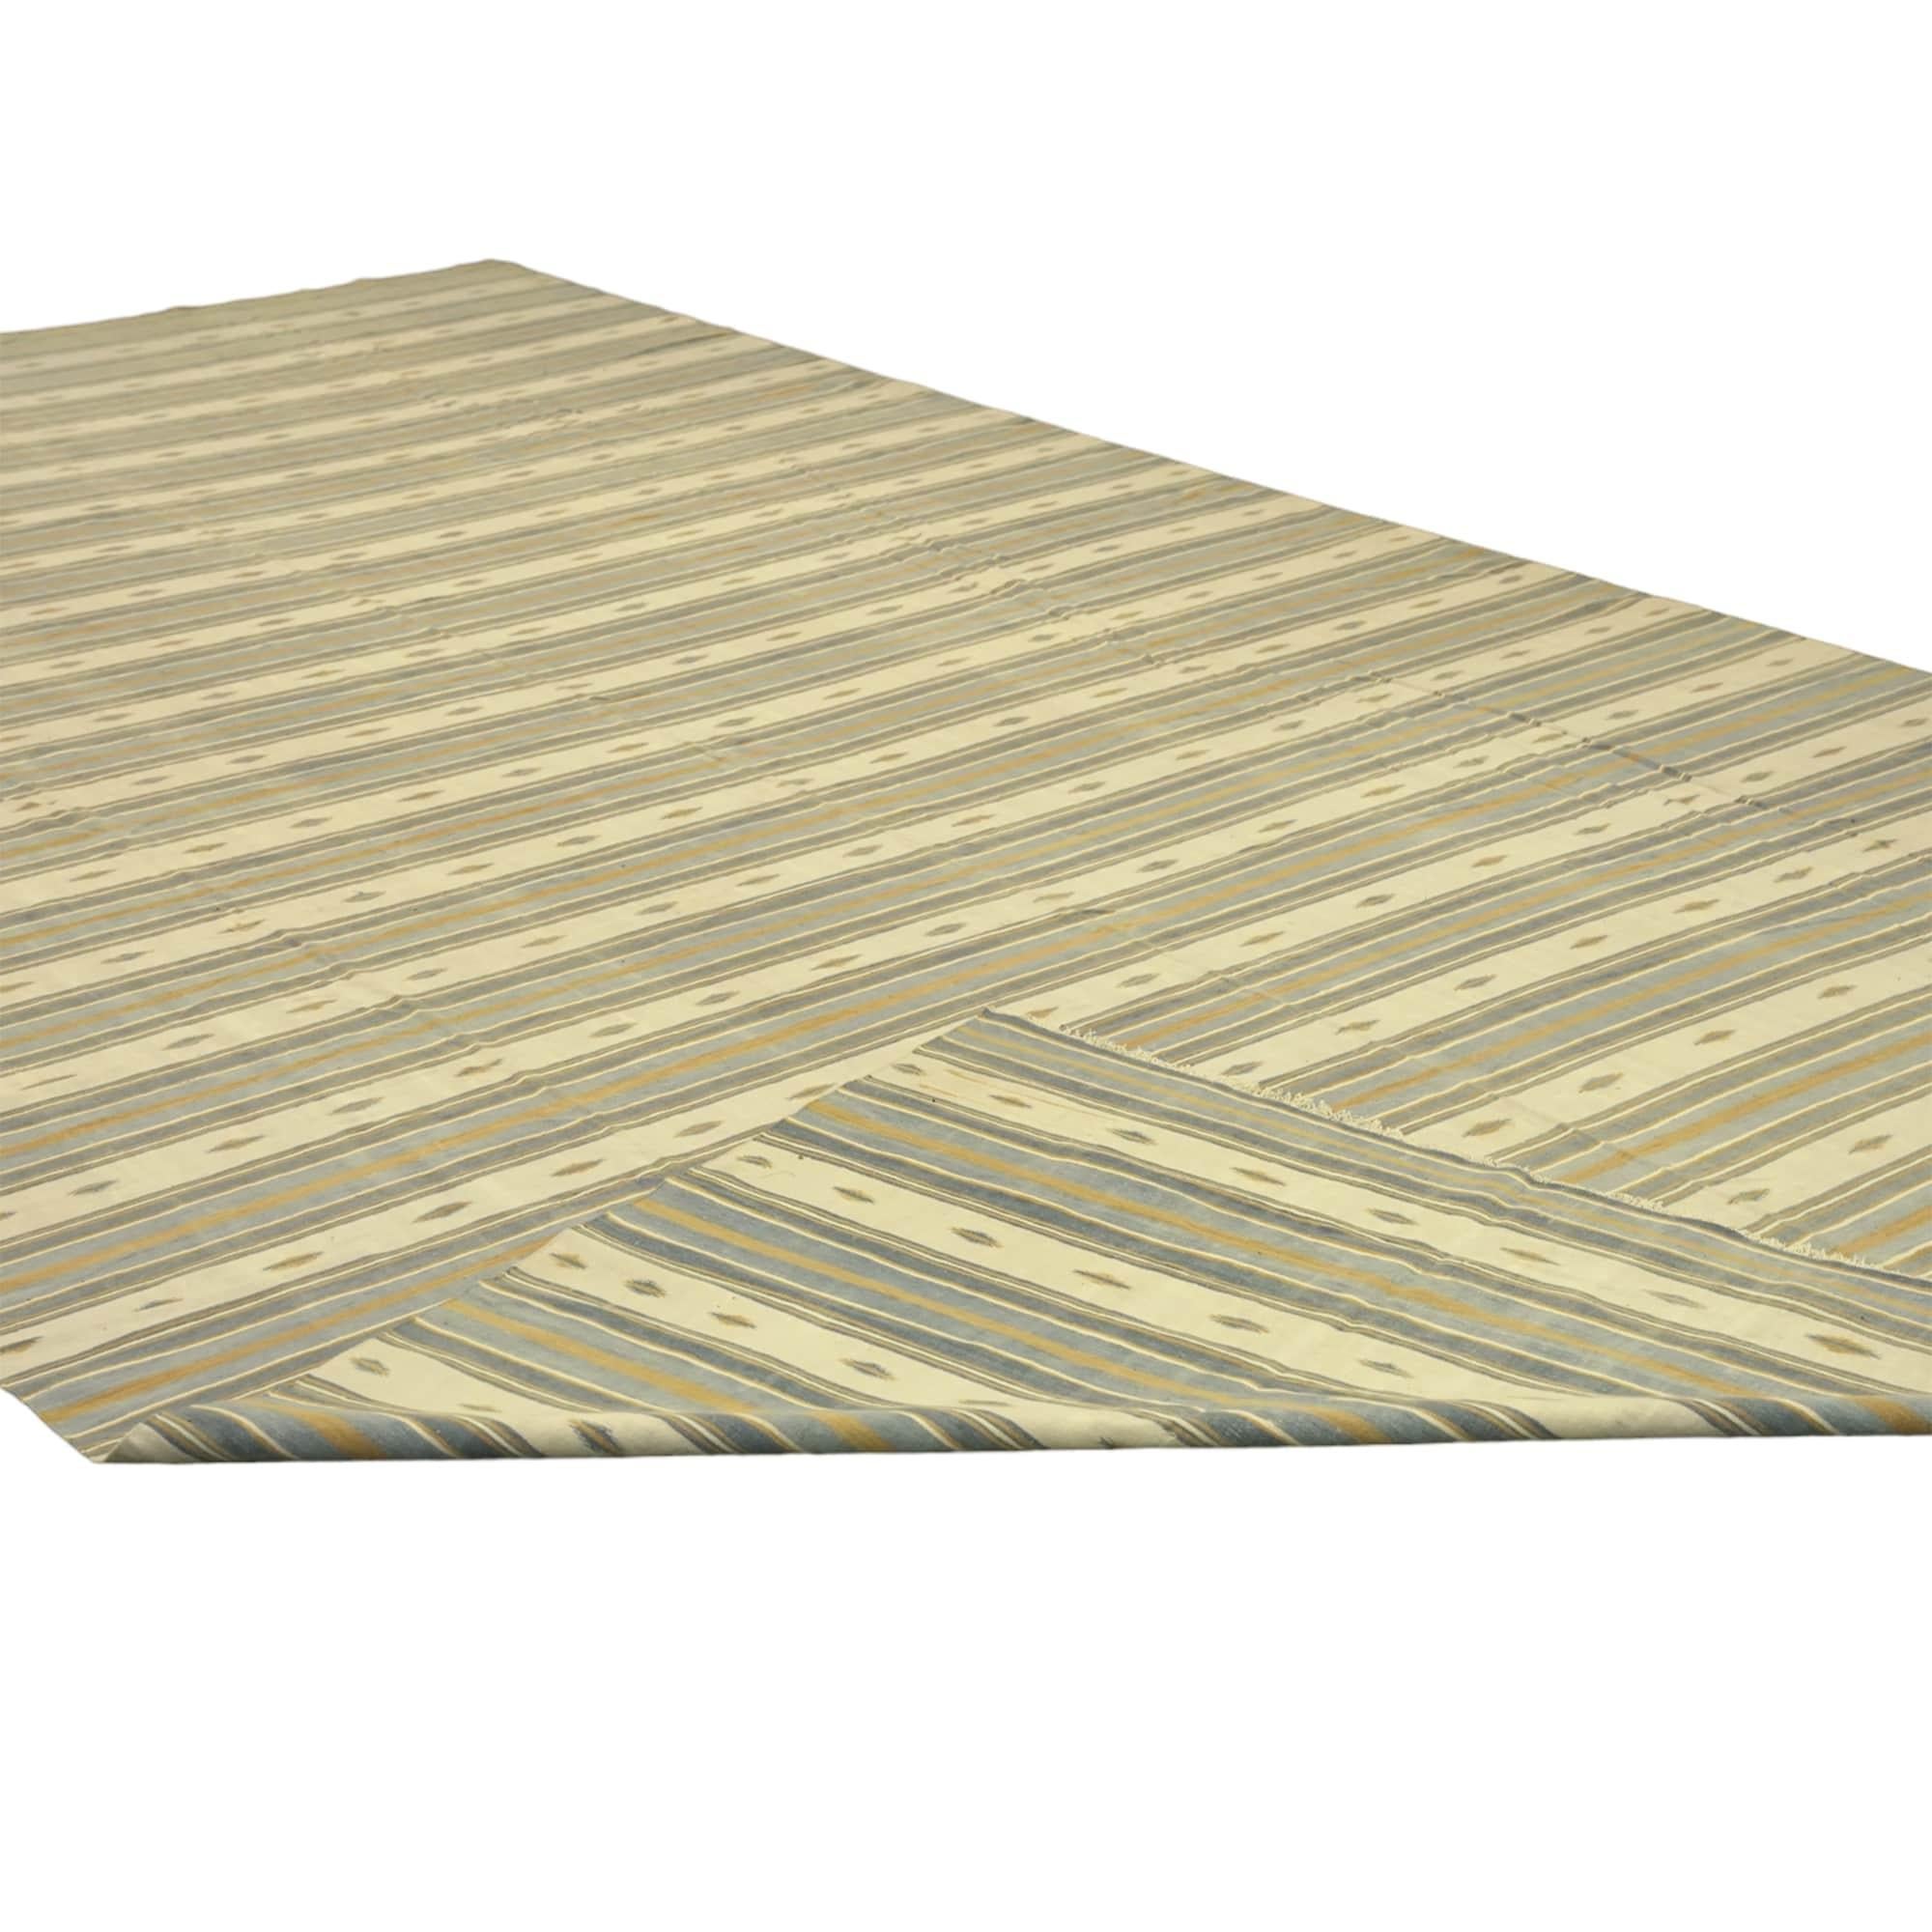 Indian Vintage Dhurrie Rug in Beige-Brownwith Stripes, from Rug & Kilim For Sale